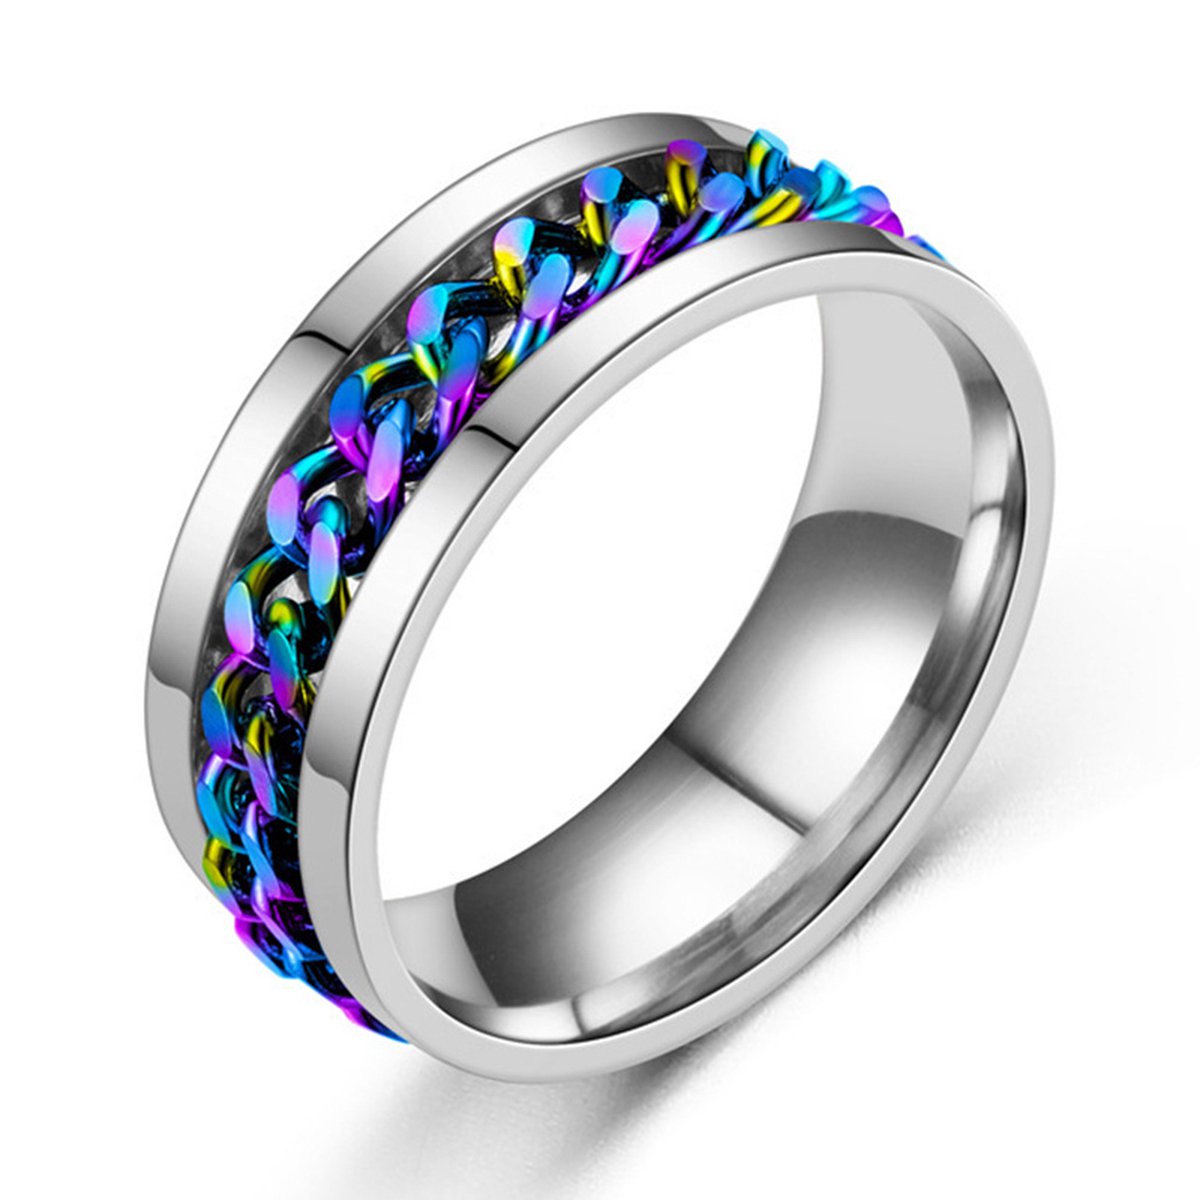 Fidget Ring Zilver - Regenboog (Maat 55 - 17 mm - 17.4 mm) - Anxiety Ring - Angst Ring - Stress Ring Heren / Dames - Spinning Ring - Draai Ring - Zilver Roestvrij Staal - Spinner Ring - Jaynoi